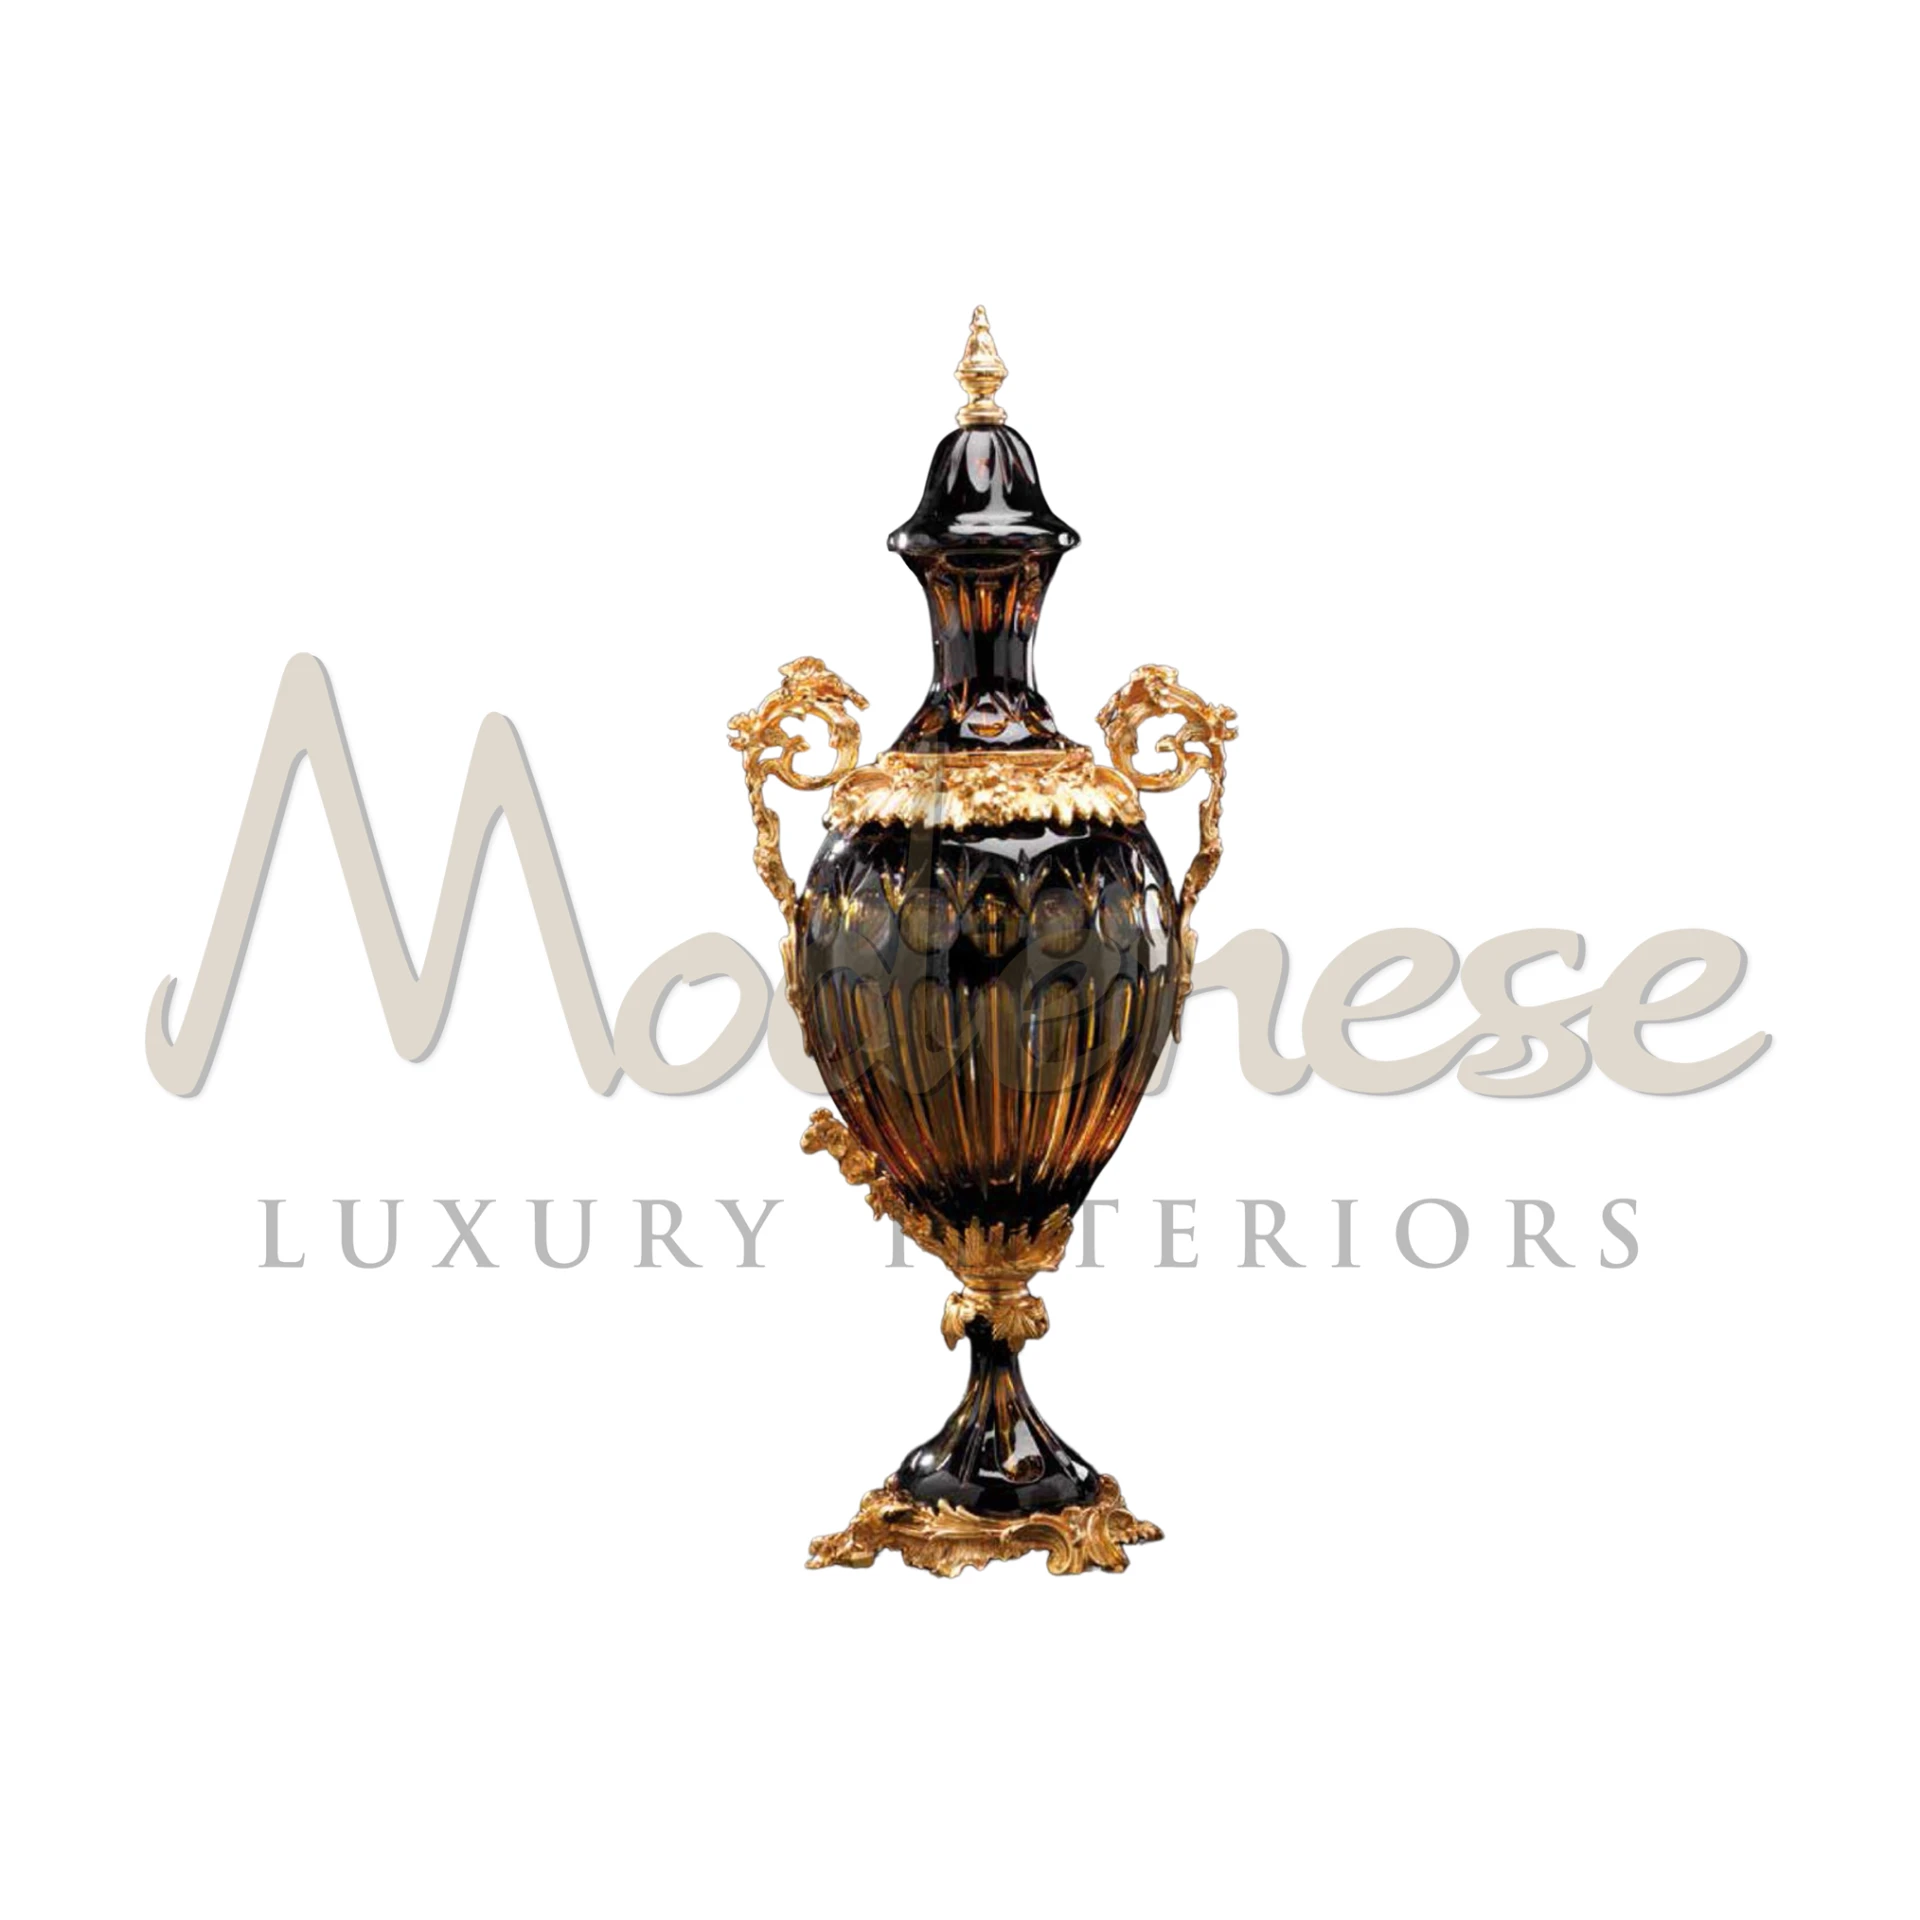 Italian design amphora, a ceramic masterpiece with intricate details and stunning colors for luxury interior design.